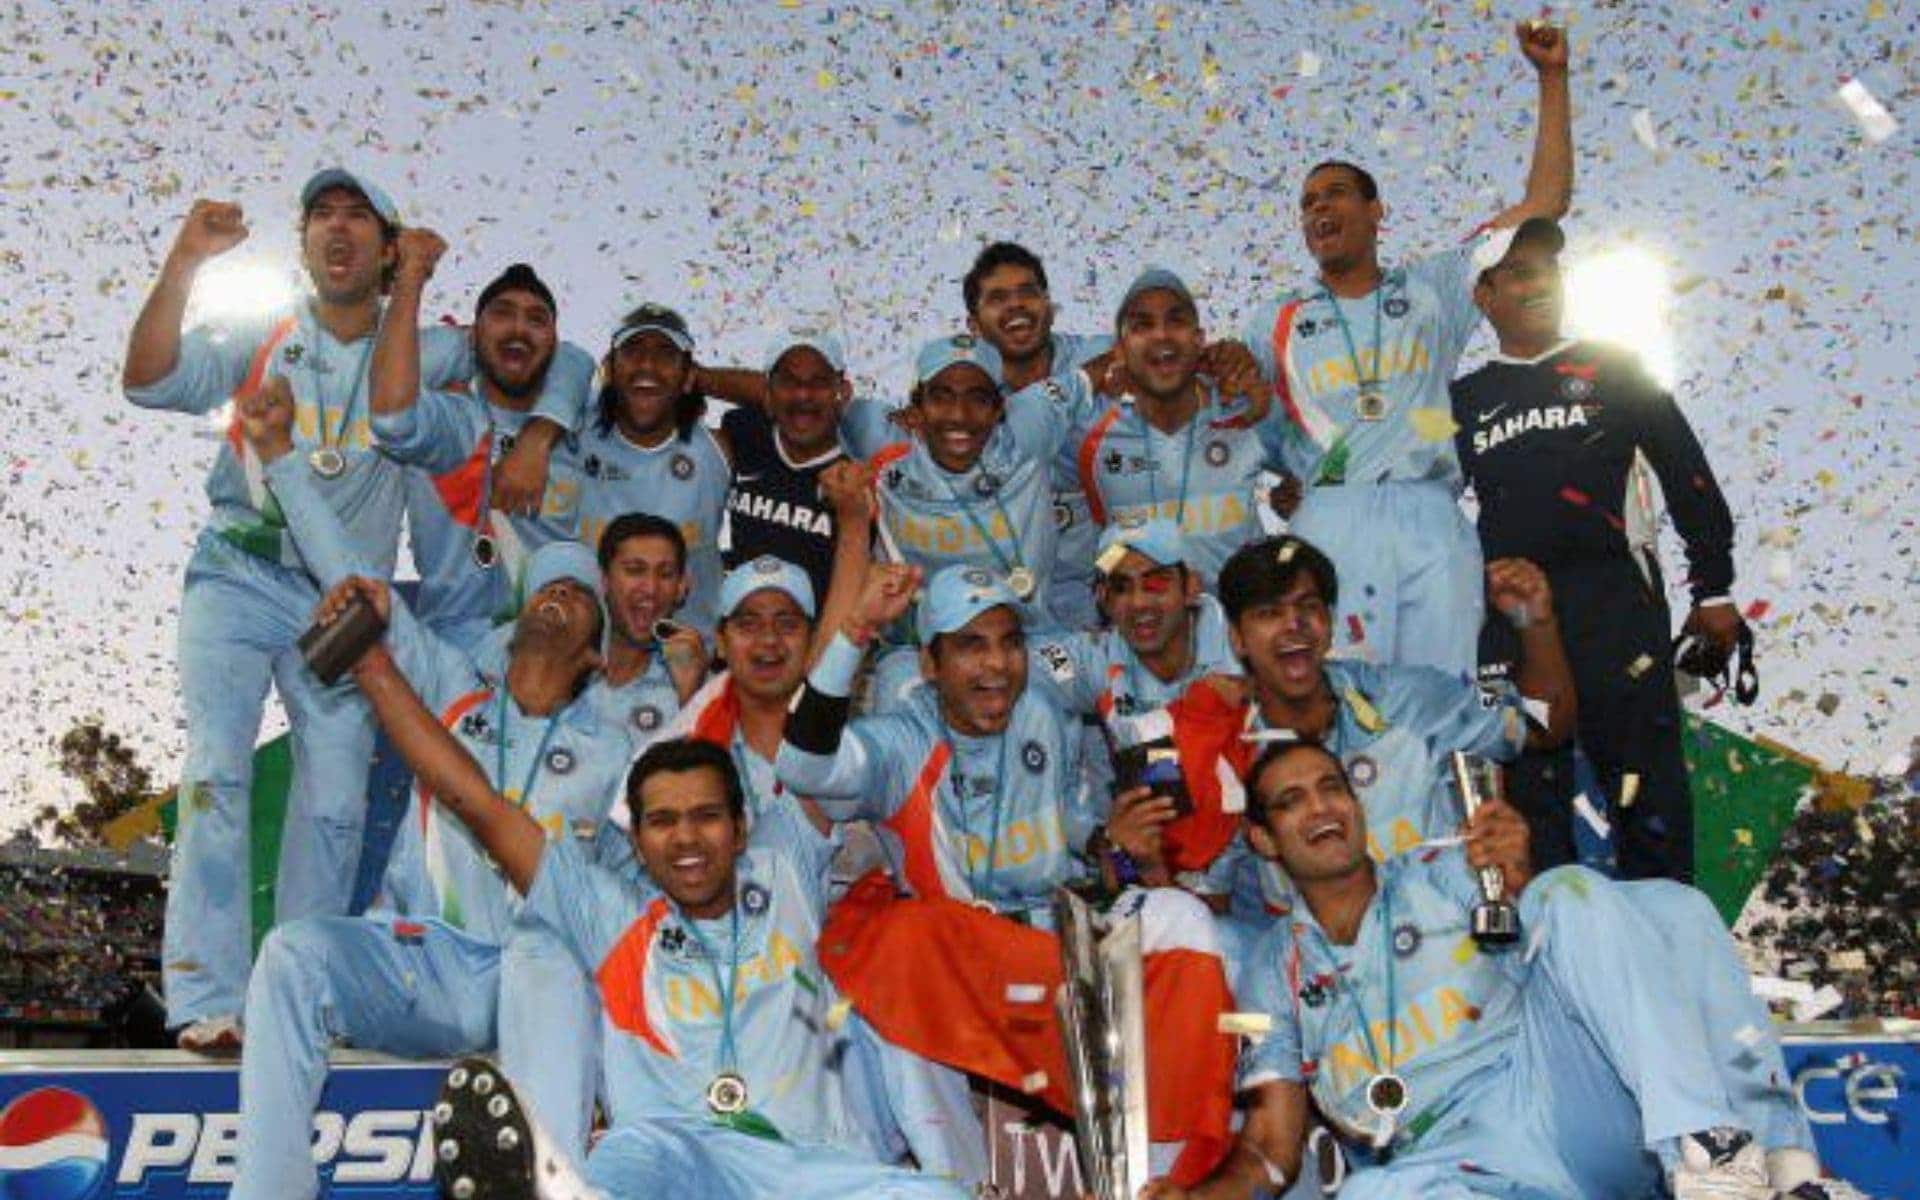 India lifted the first ever T20 world cup trophy under the captaincy of MS Dhoni [X.com]